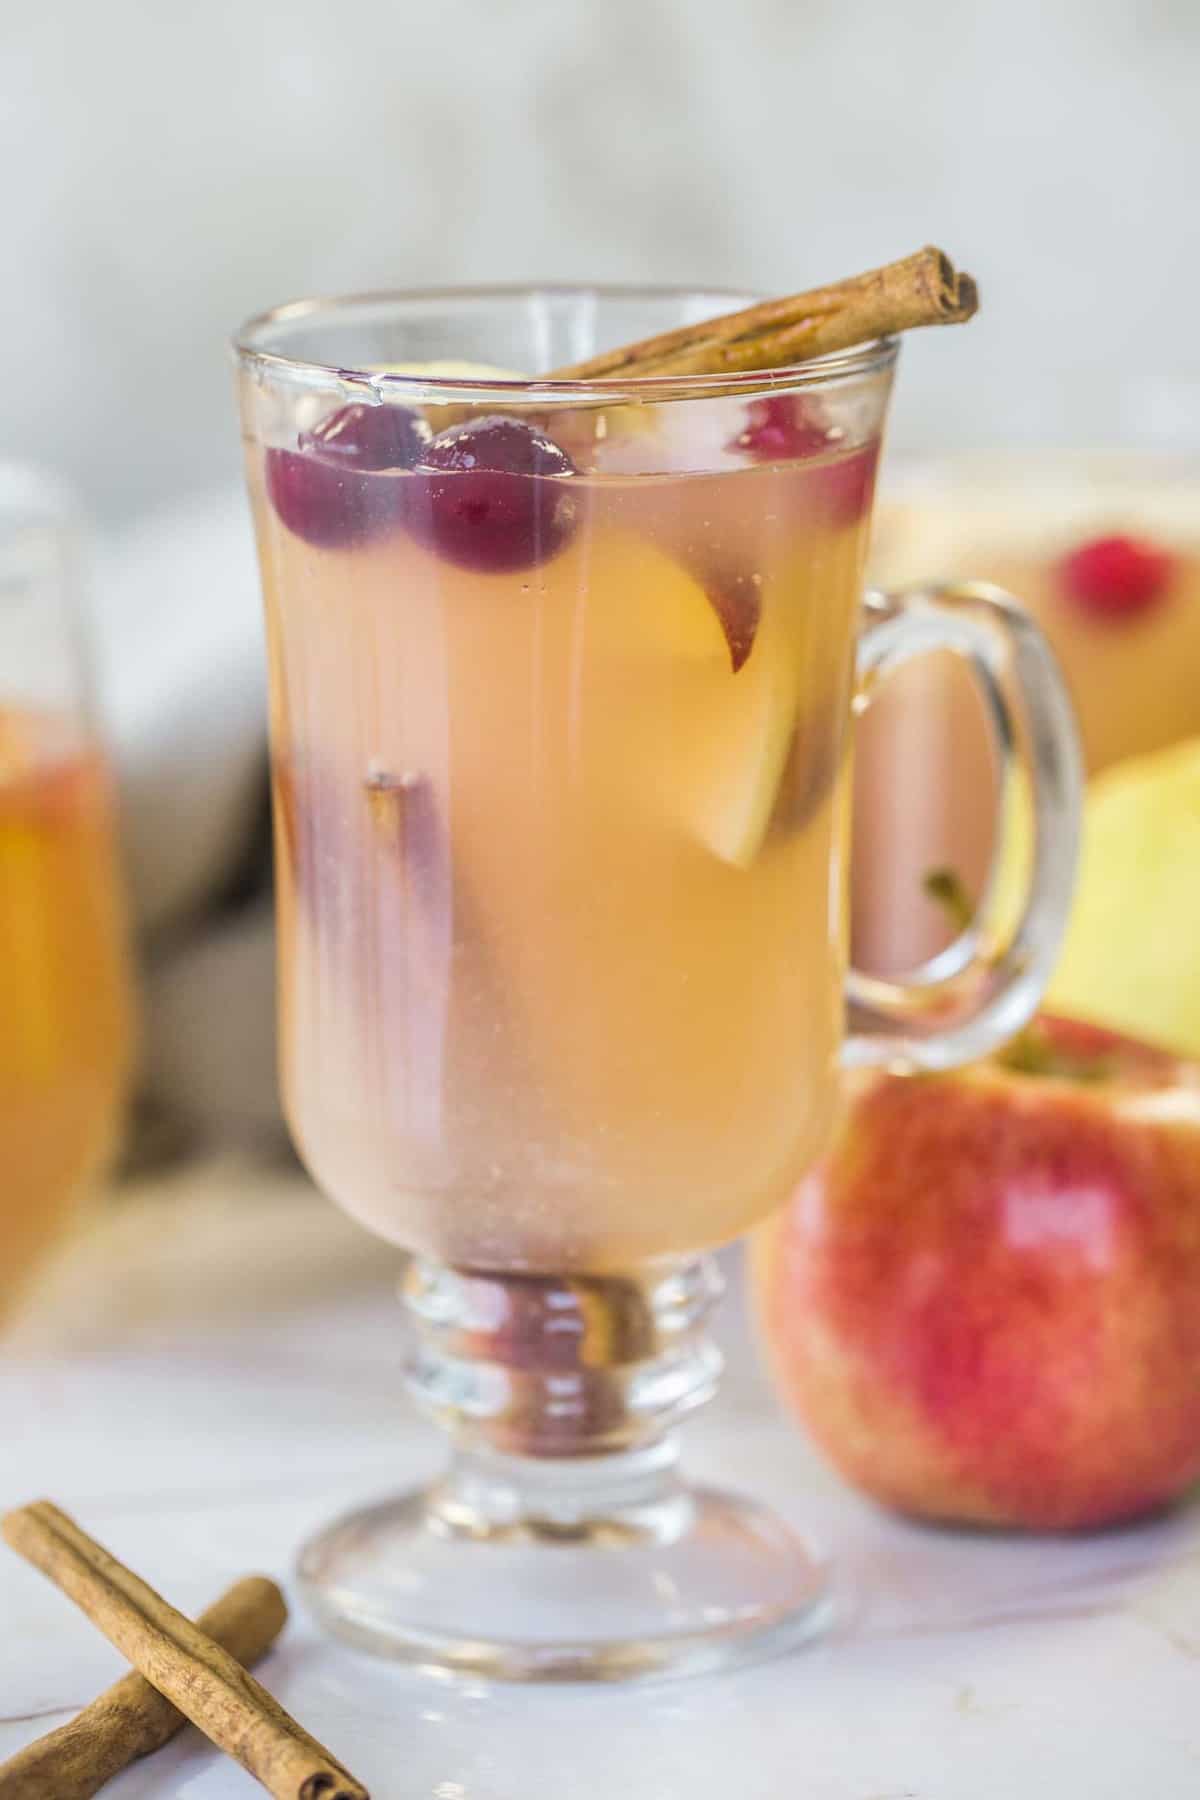 Apple cider in a cup with apples slices and cranberries.